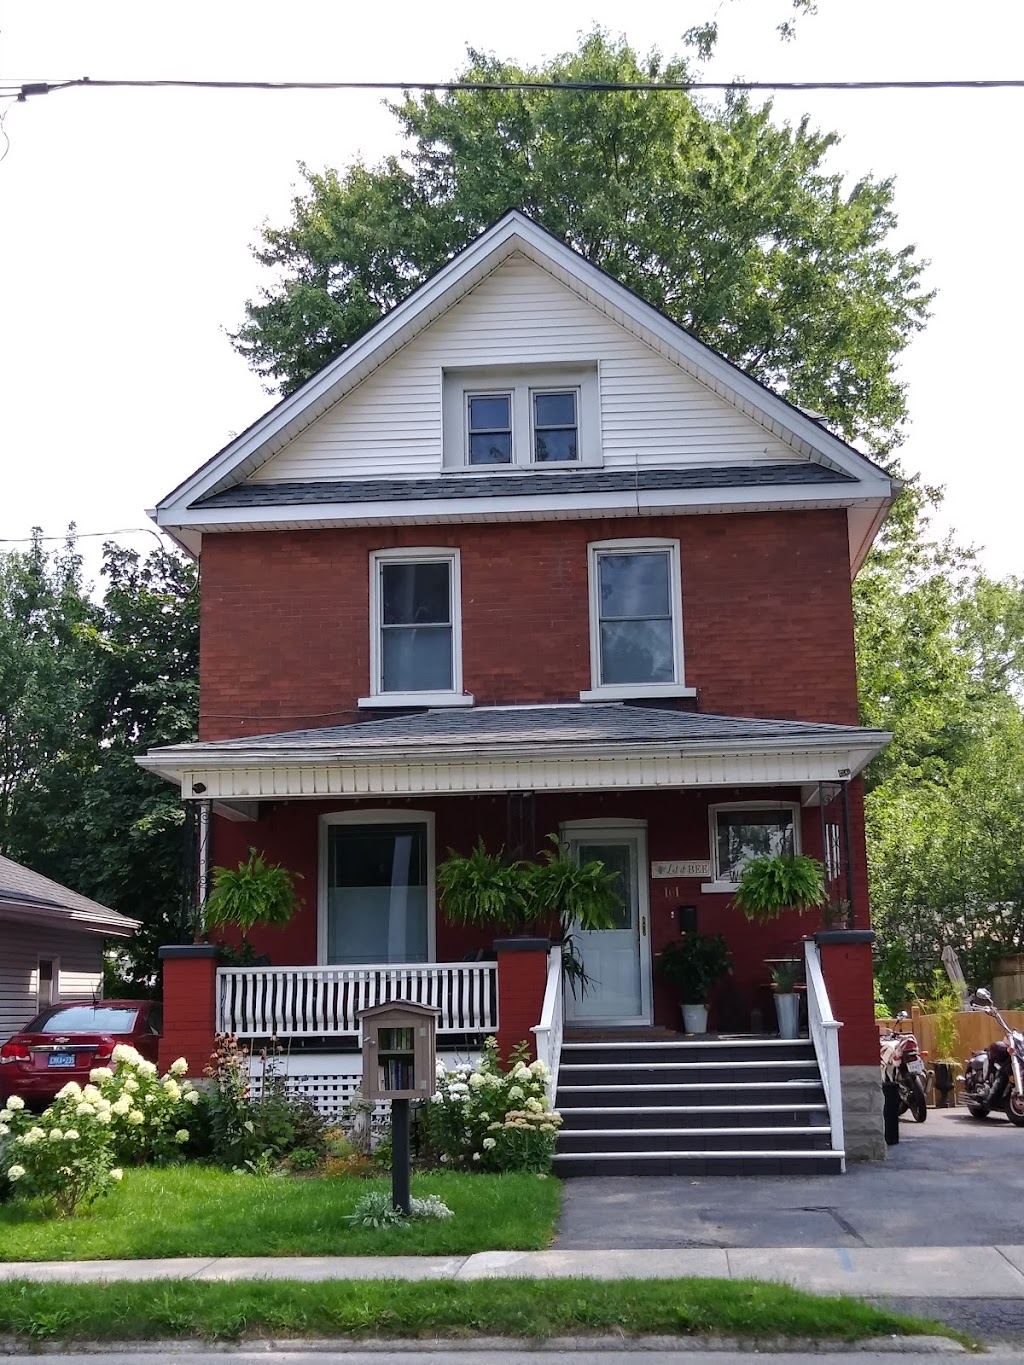 Limelight Bed & Breakfast | 161 Front St, Stratford, ON N5A 4H5, Canada | Phone: (519) 273-1672